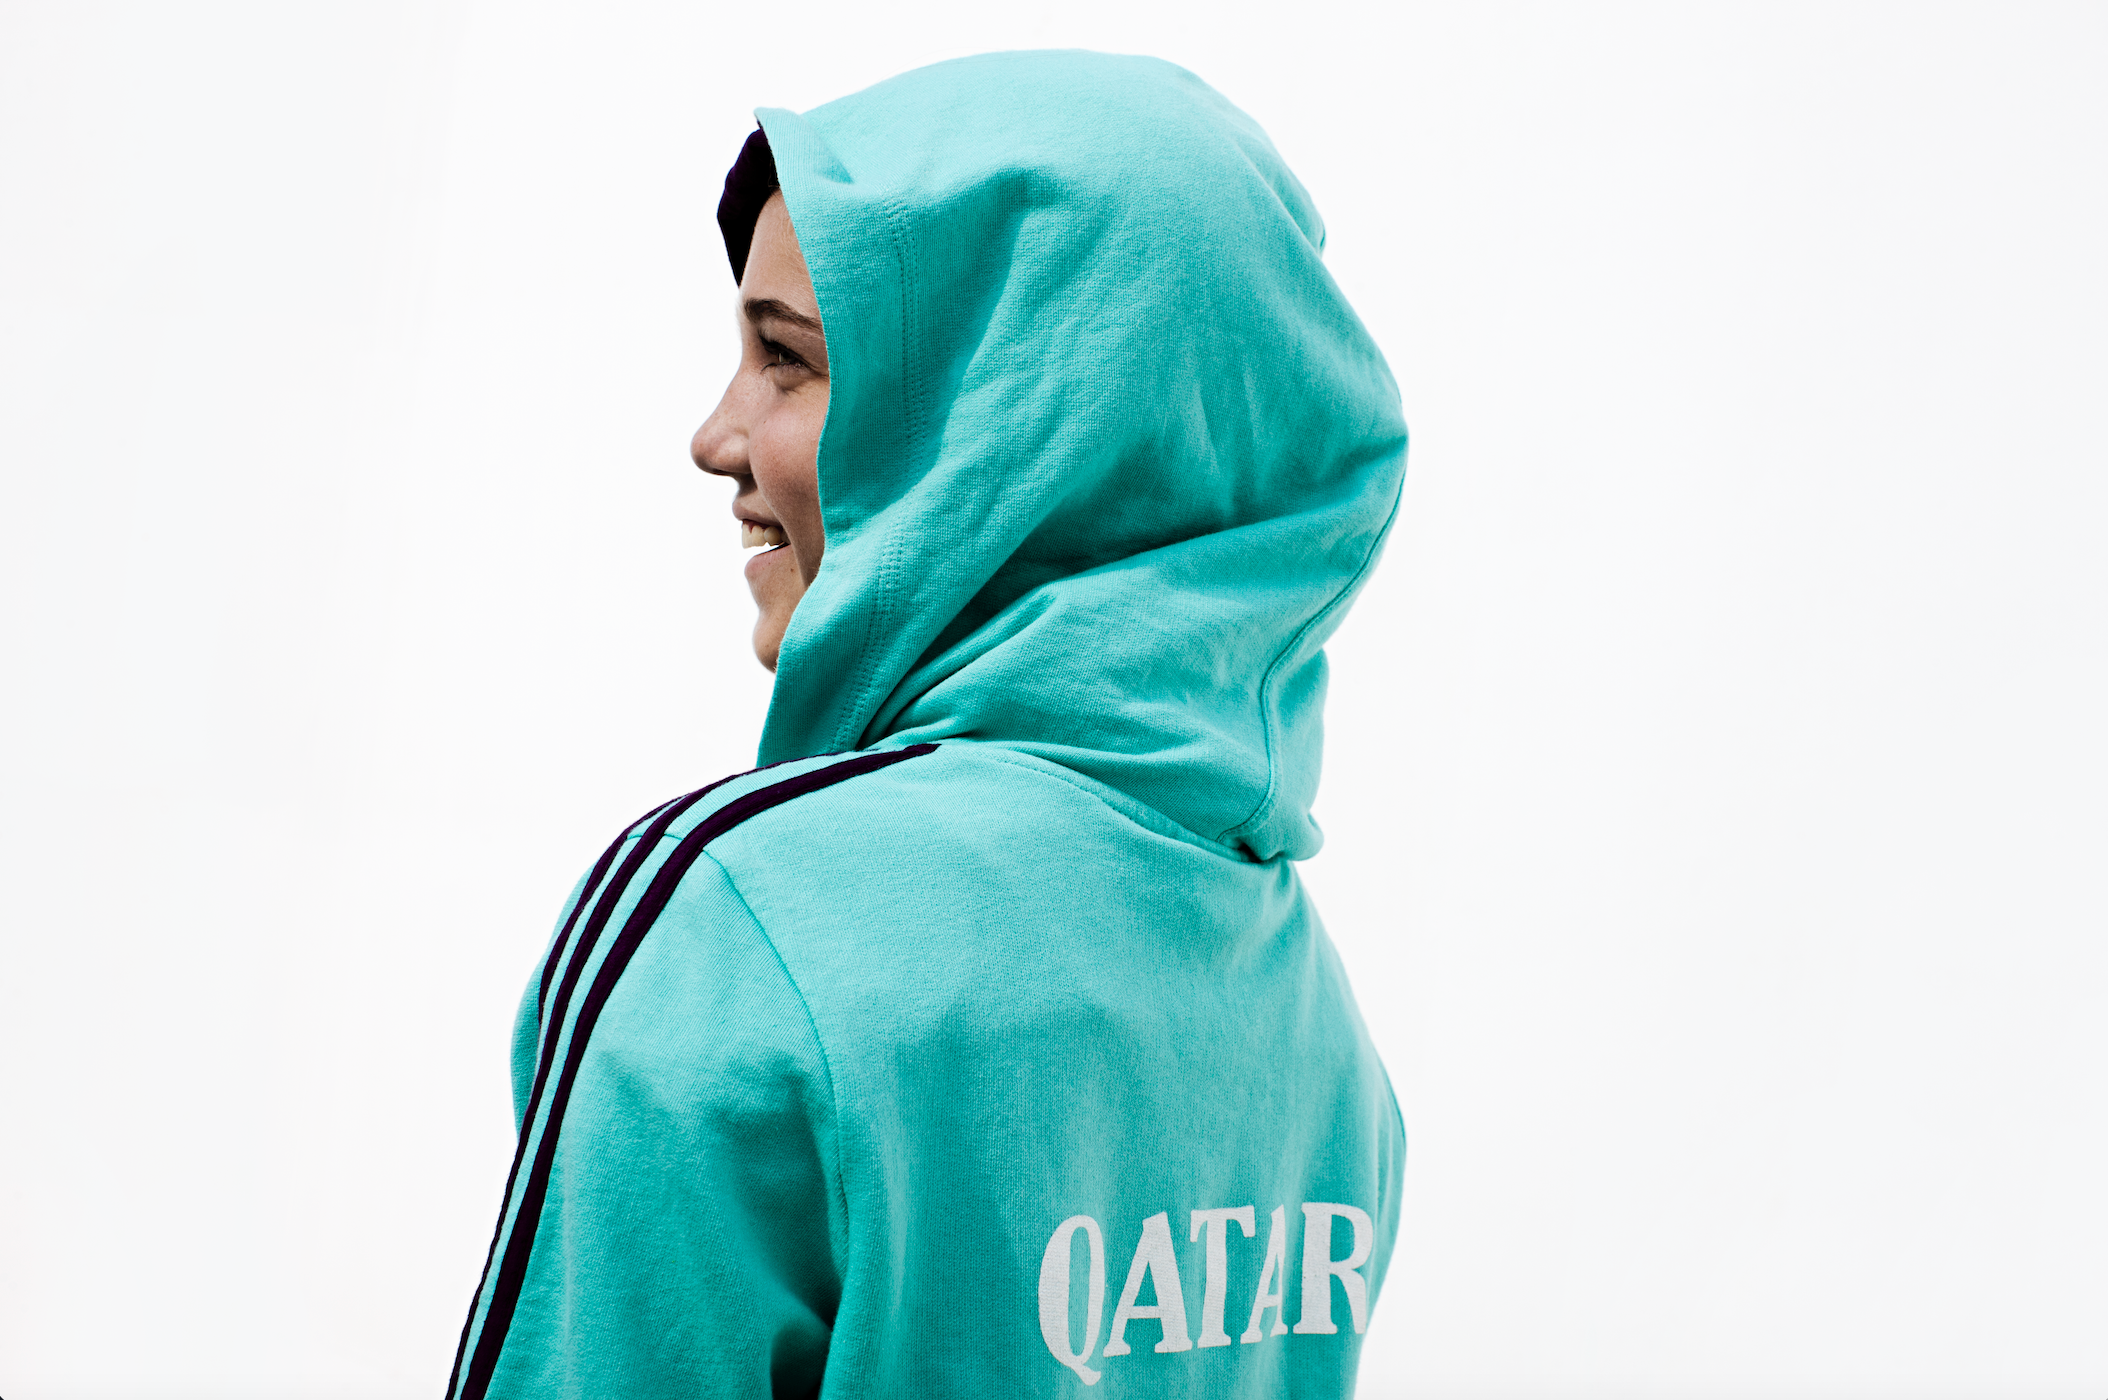 Smiling woman seen from the side, wearing a turquoise hooded sport sweatshirt with Qatar on the back in white text.